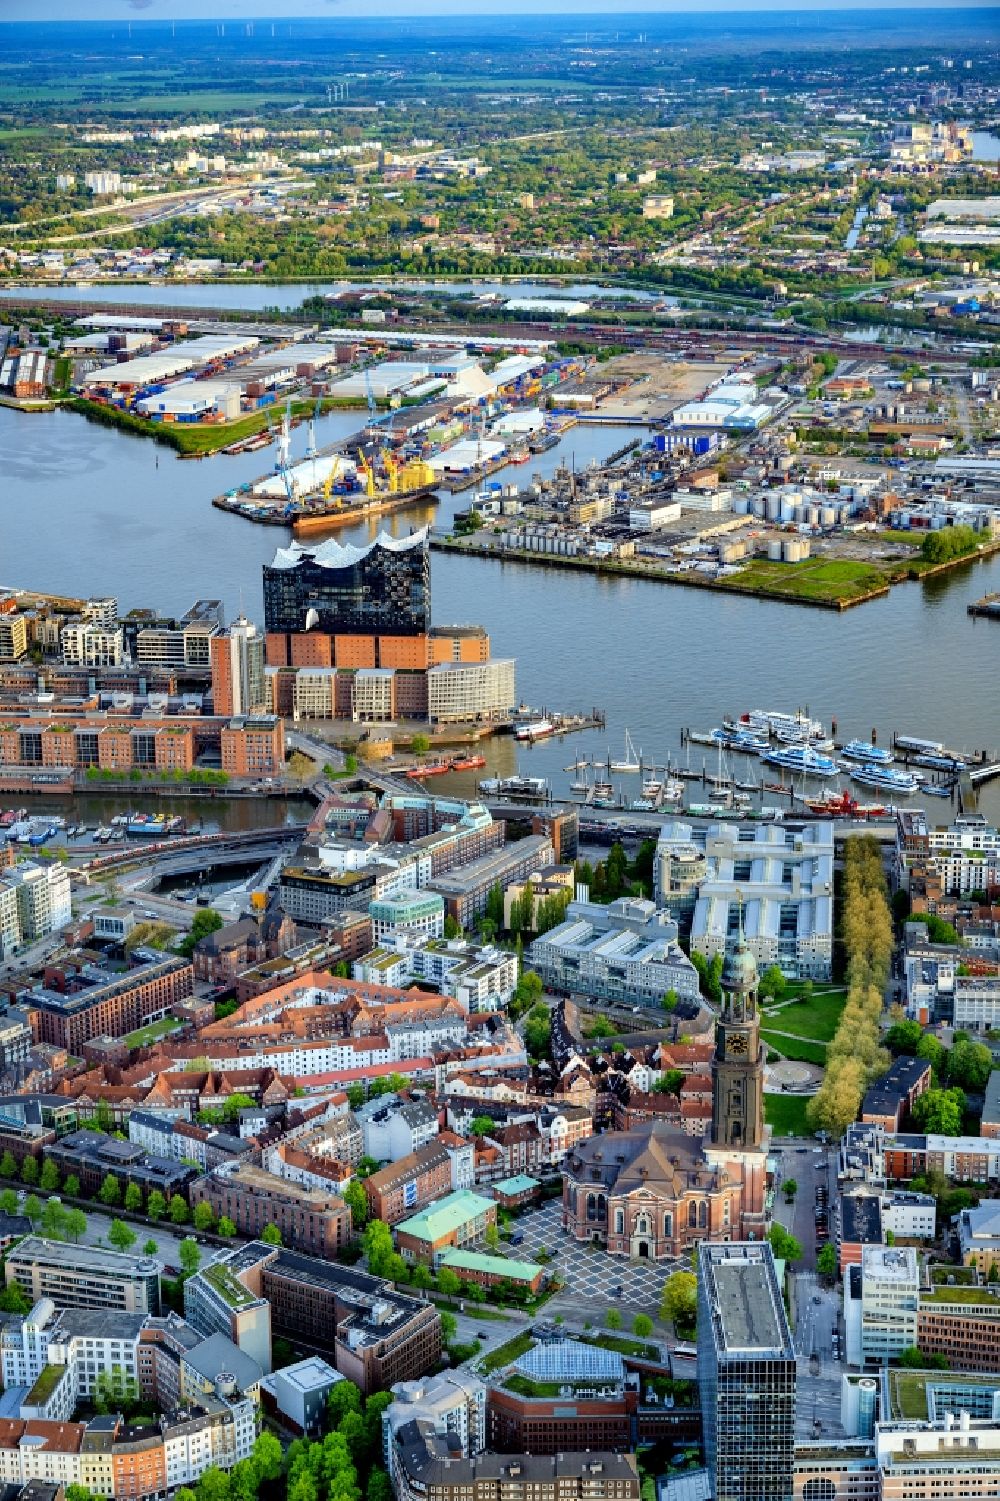 Hamburg from the bird's eye view: View of the district in the Neustadt district with the Portuguese Quarter and the Elbphilharmonie in Hamburg, Germany